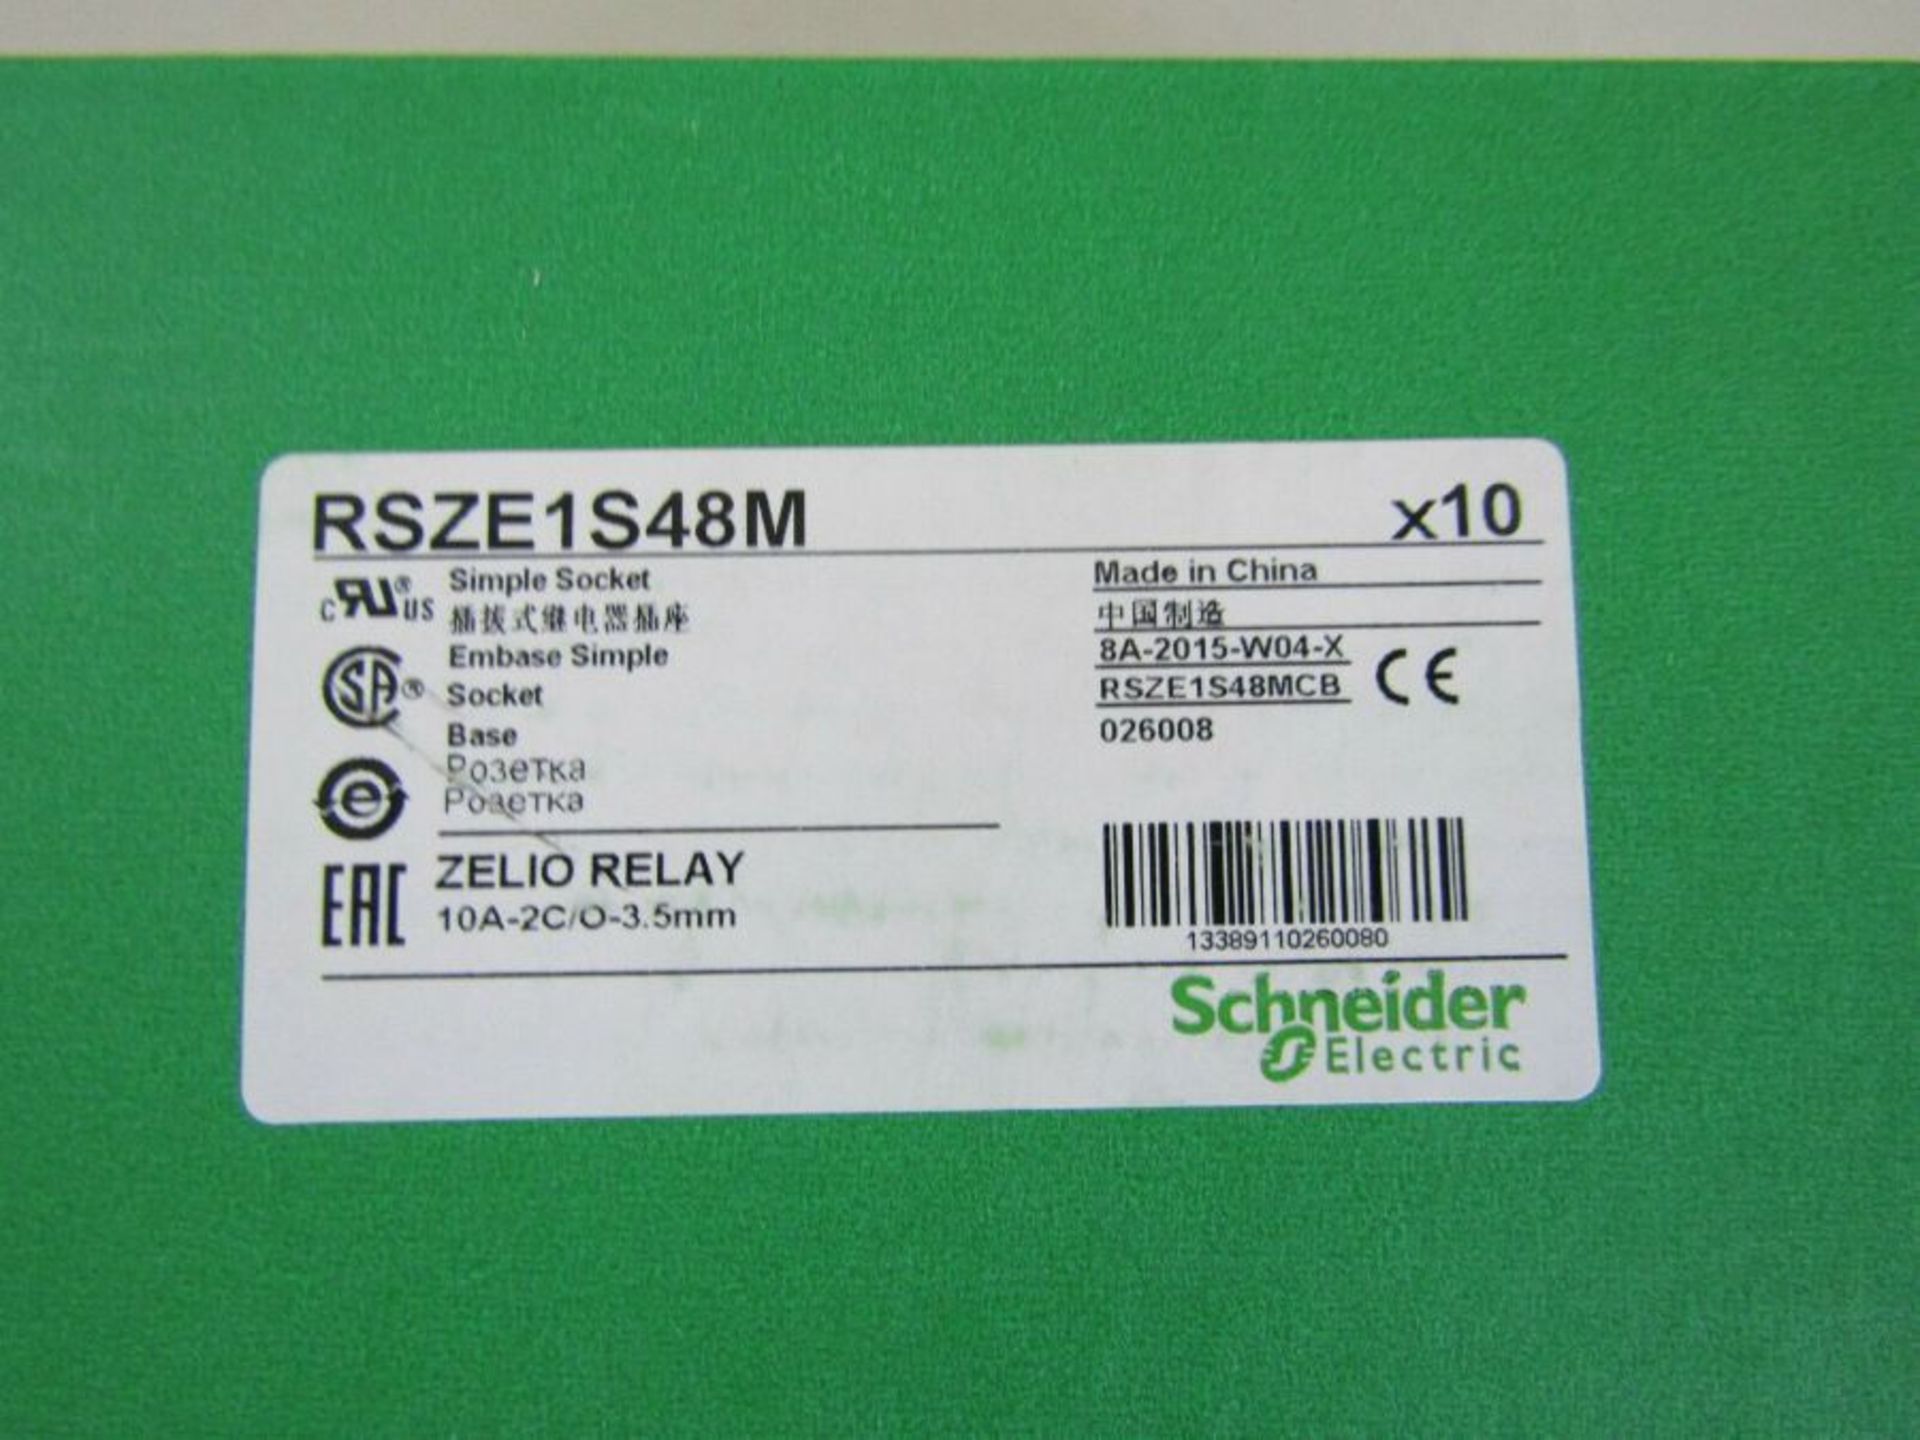 200 x SCHNEIDER RSZE1S48M Relay Socket for RSB Series - (20 boxes of 10) S2 - 8497667 - Image 3 of 6